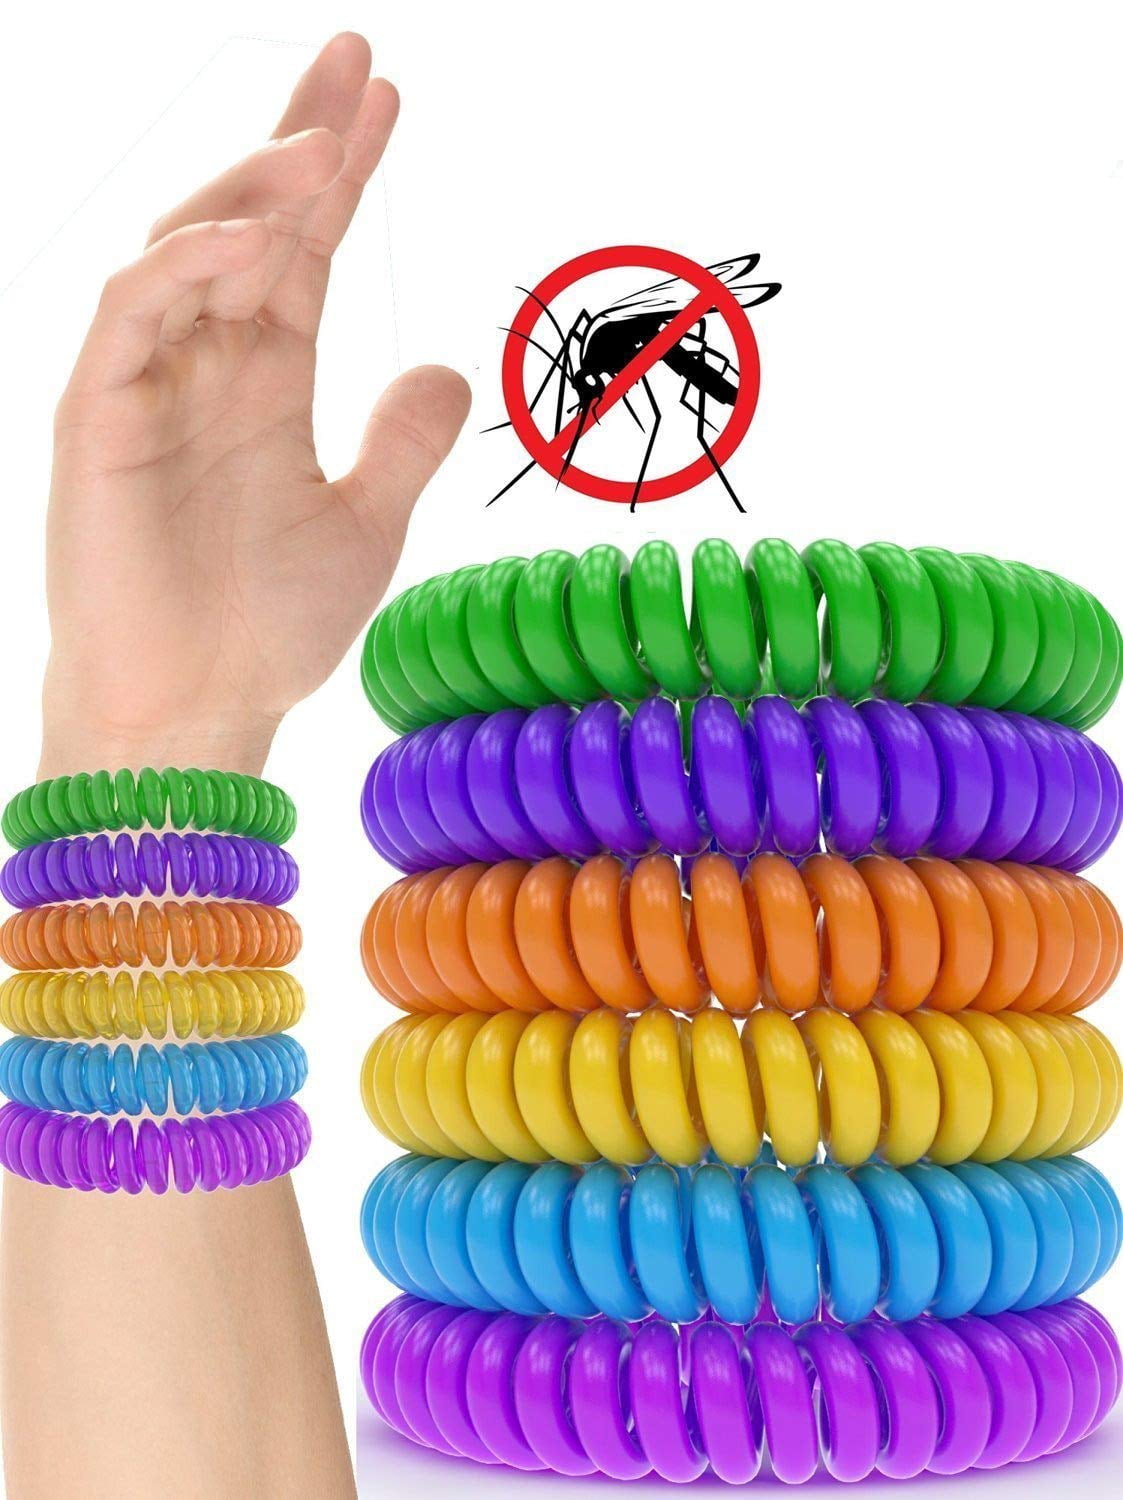 Hot Sale Anti Mosquito Pest Insect Bugs Repellent Repeller Bracelet Wristband 